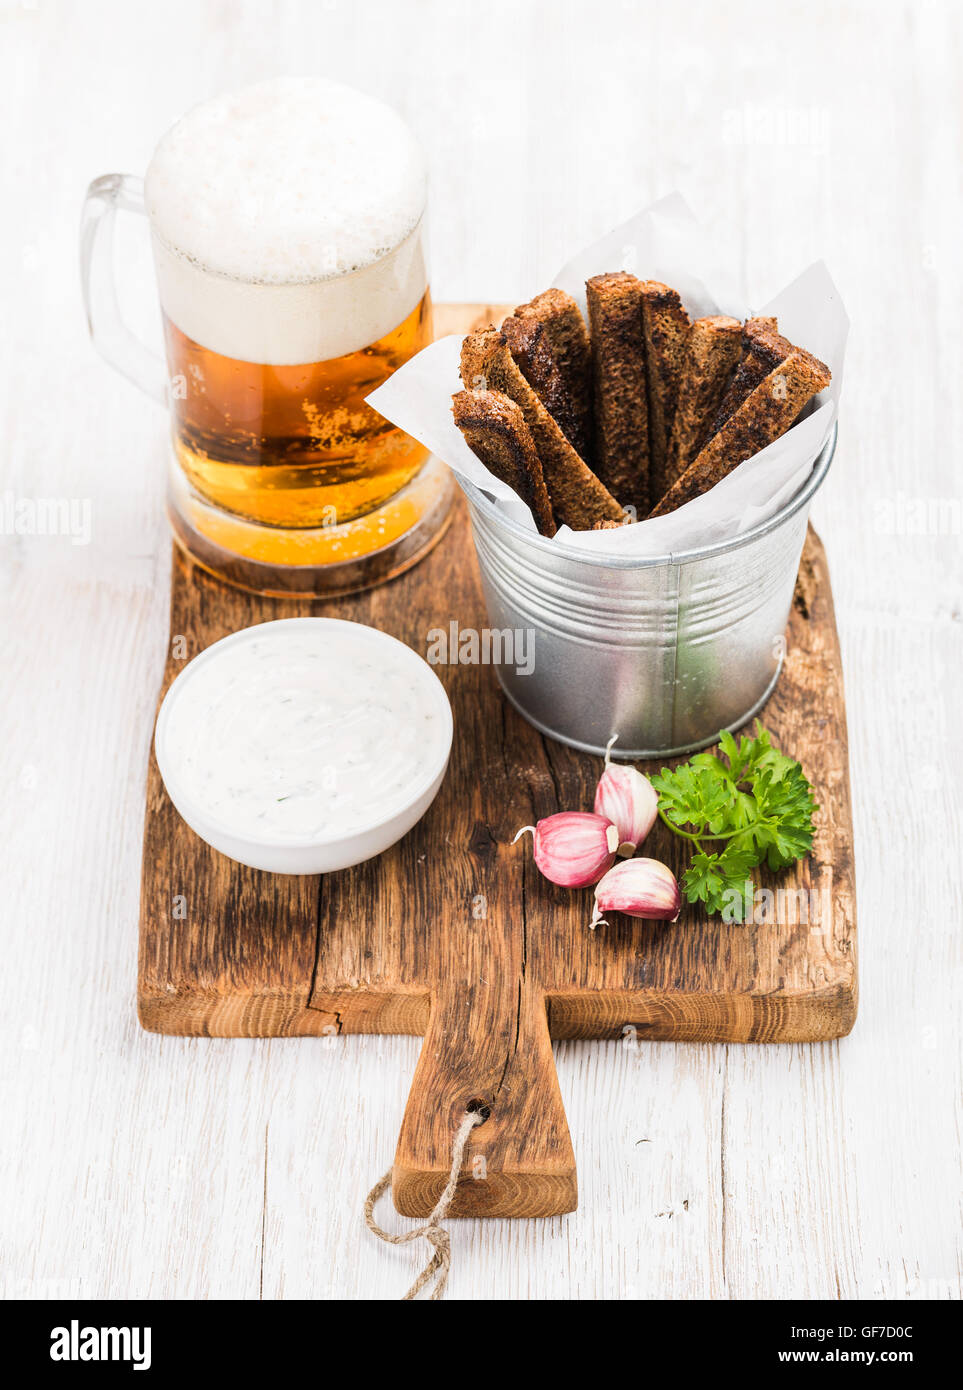 Beer snack set. Pint of pilsener in mug, open glass bottle, rye bread croutons with garlic cream cheese sauce and fresh parsley on rustic wooden board over white painted old background Stock Photo